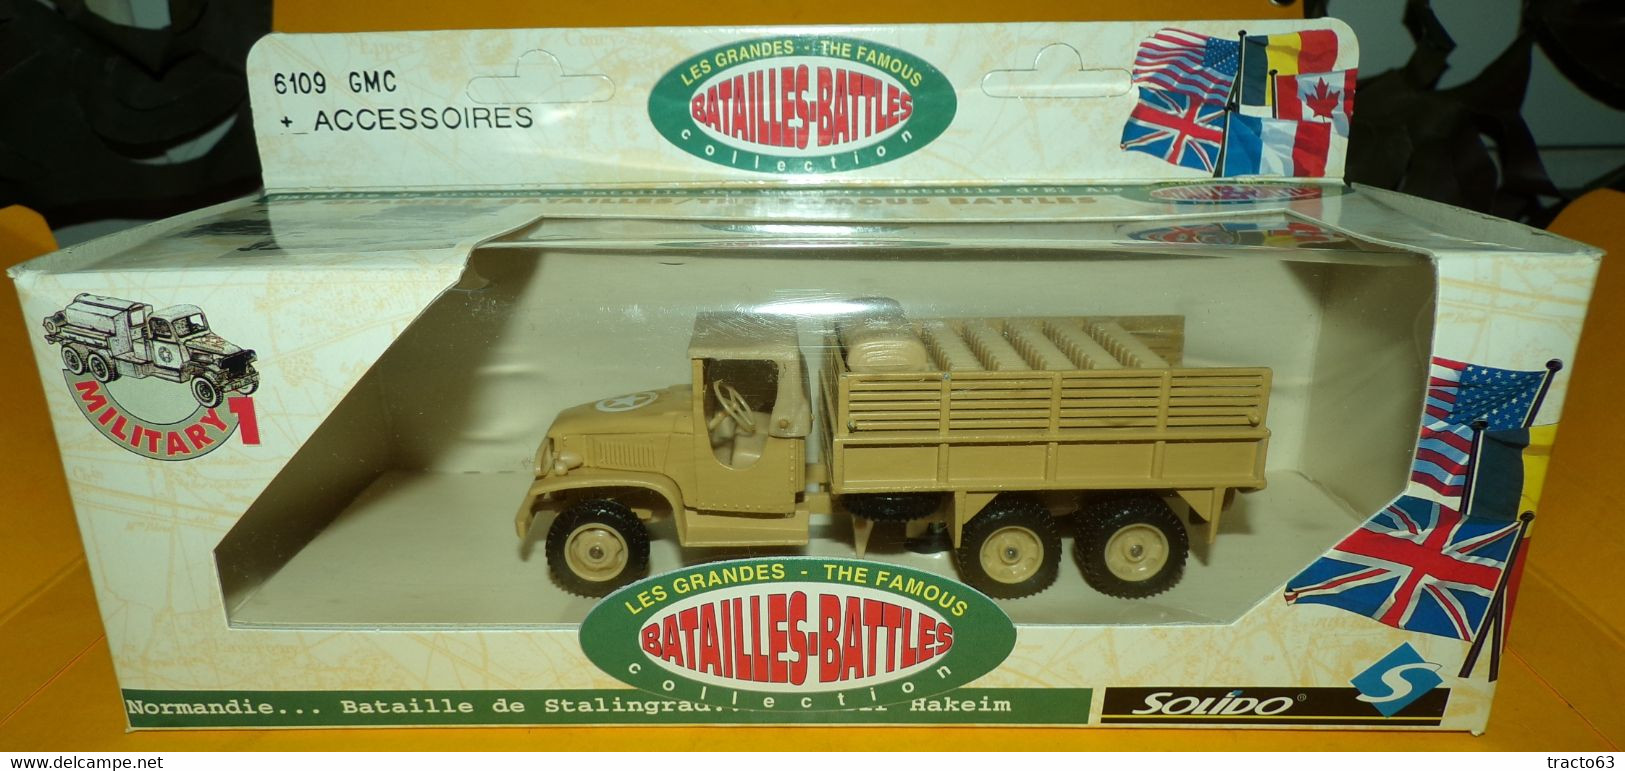 SOLIDO 1/50 : GMC + ACCESSOIRES , U.S  WWII , NUMERO 6109 , NEUF ,SUPERBE , FABRICATION FRANCAISE SOLIDO EN BOITE D'ORIG - Chars